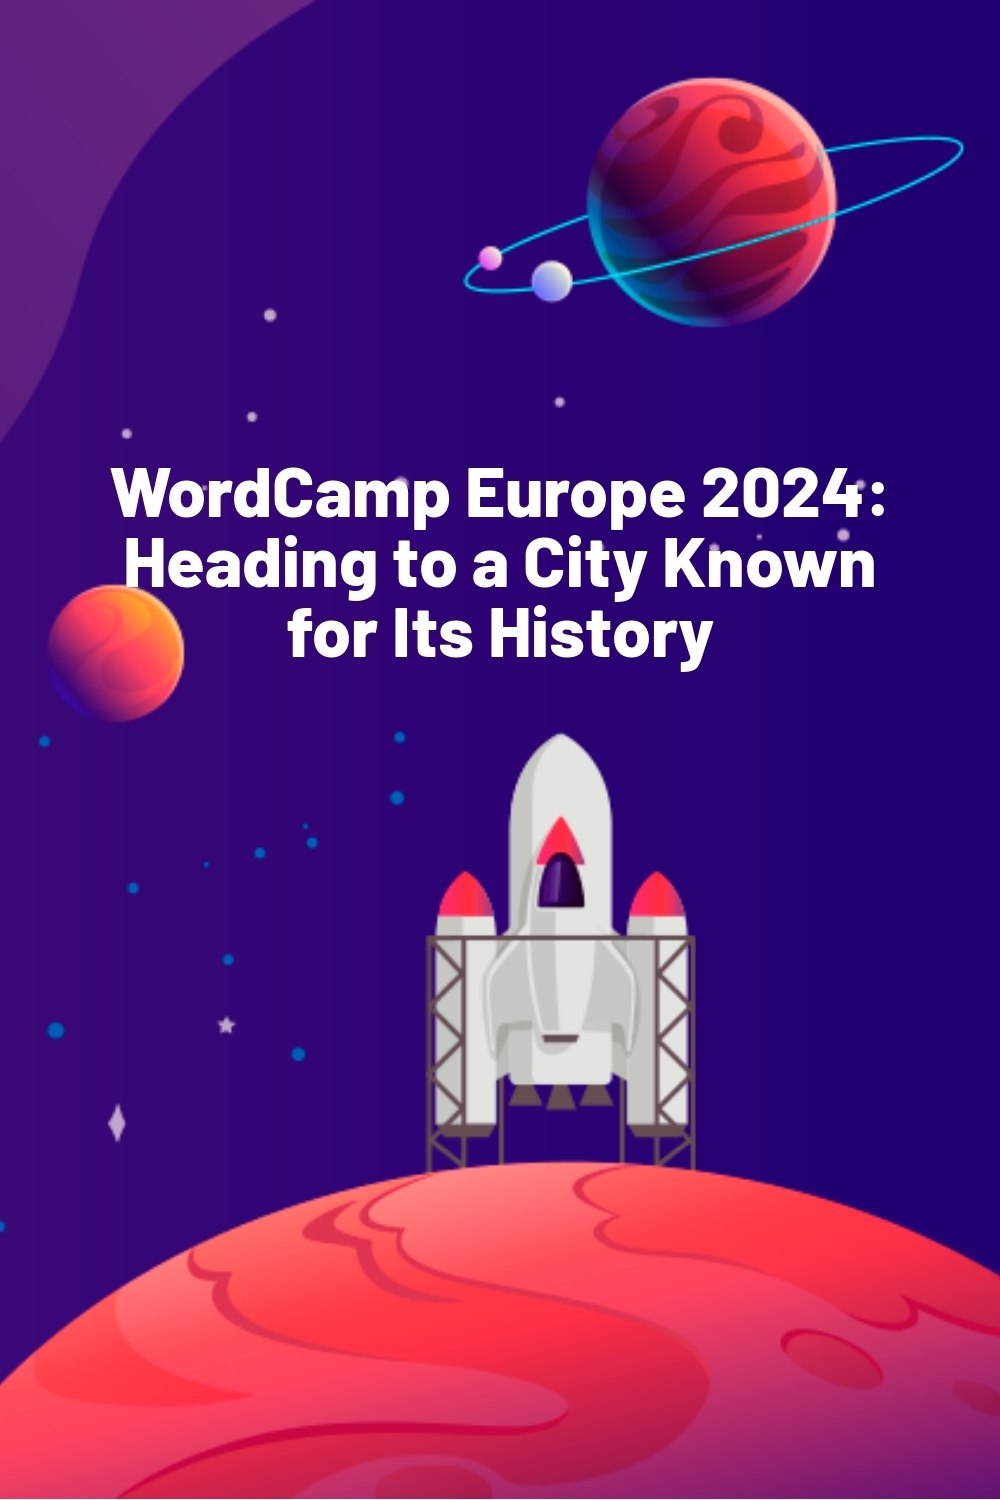 WordCamp Europe 2024: Heading to a City Known for Its History